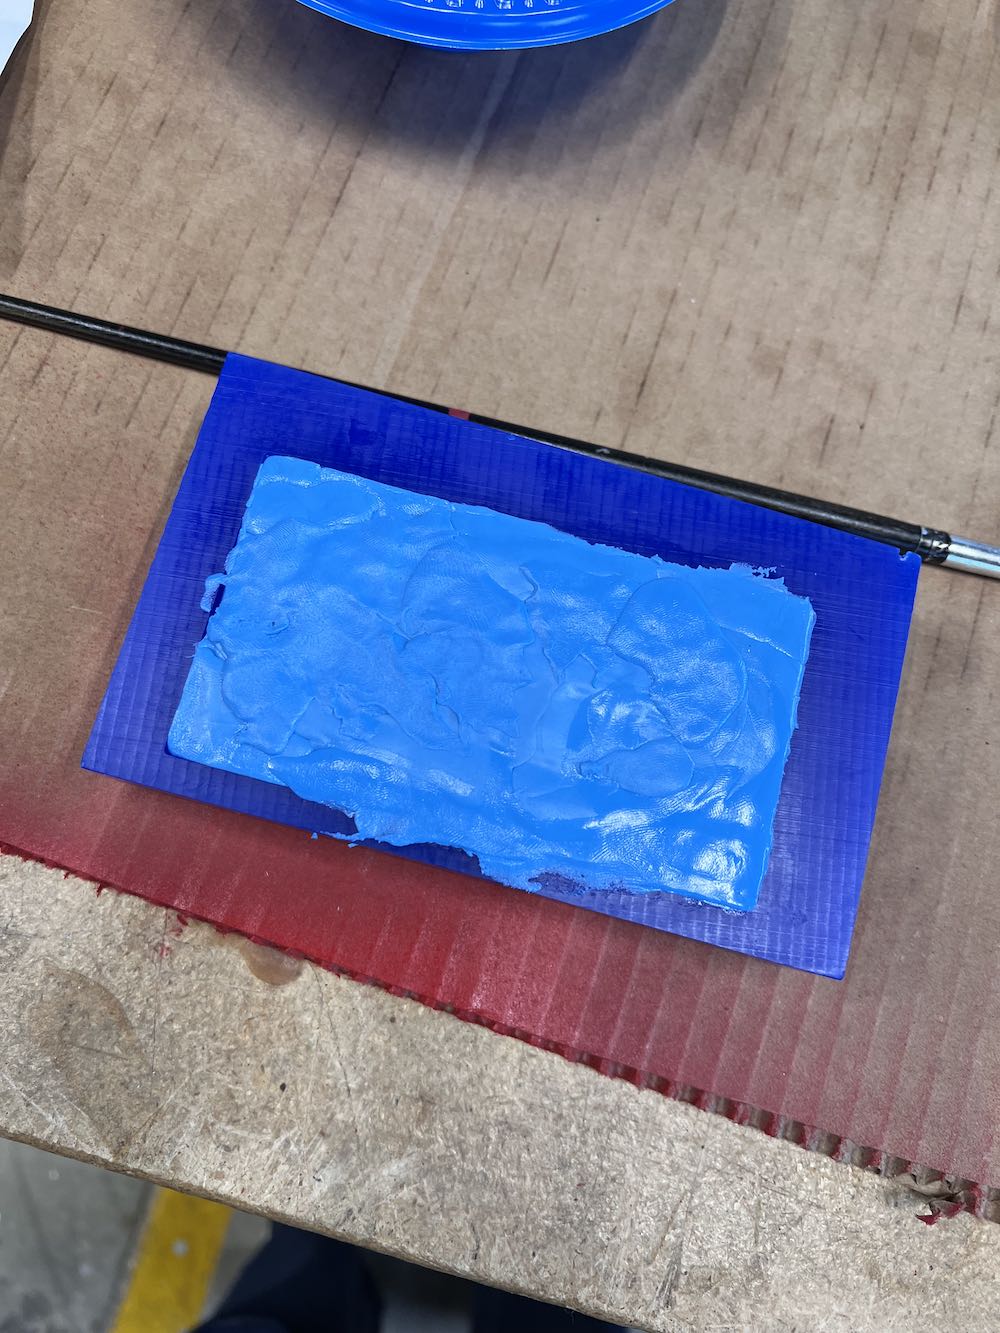 Covered putty on mold